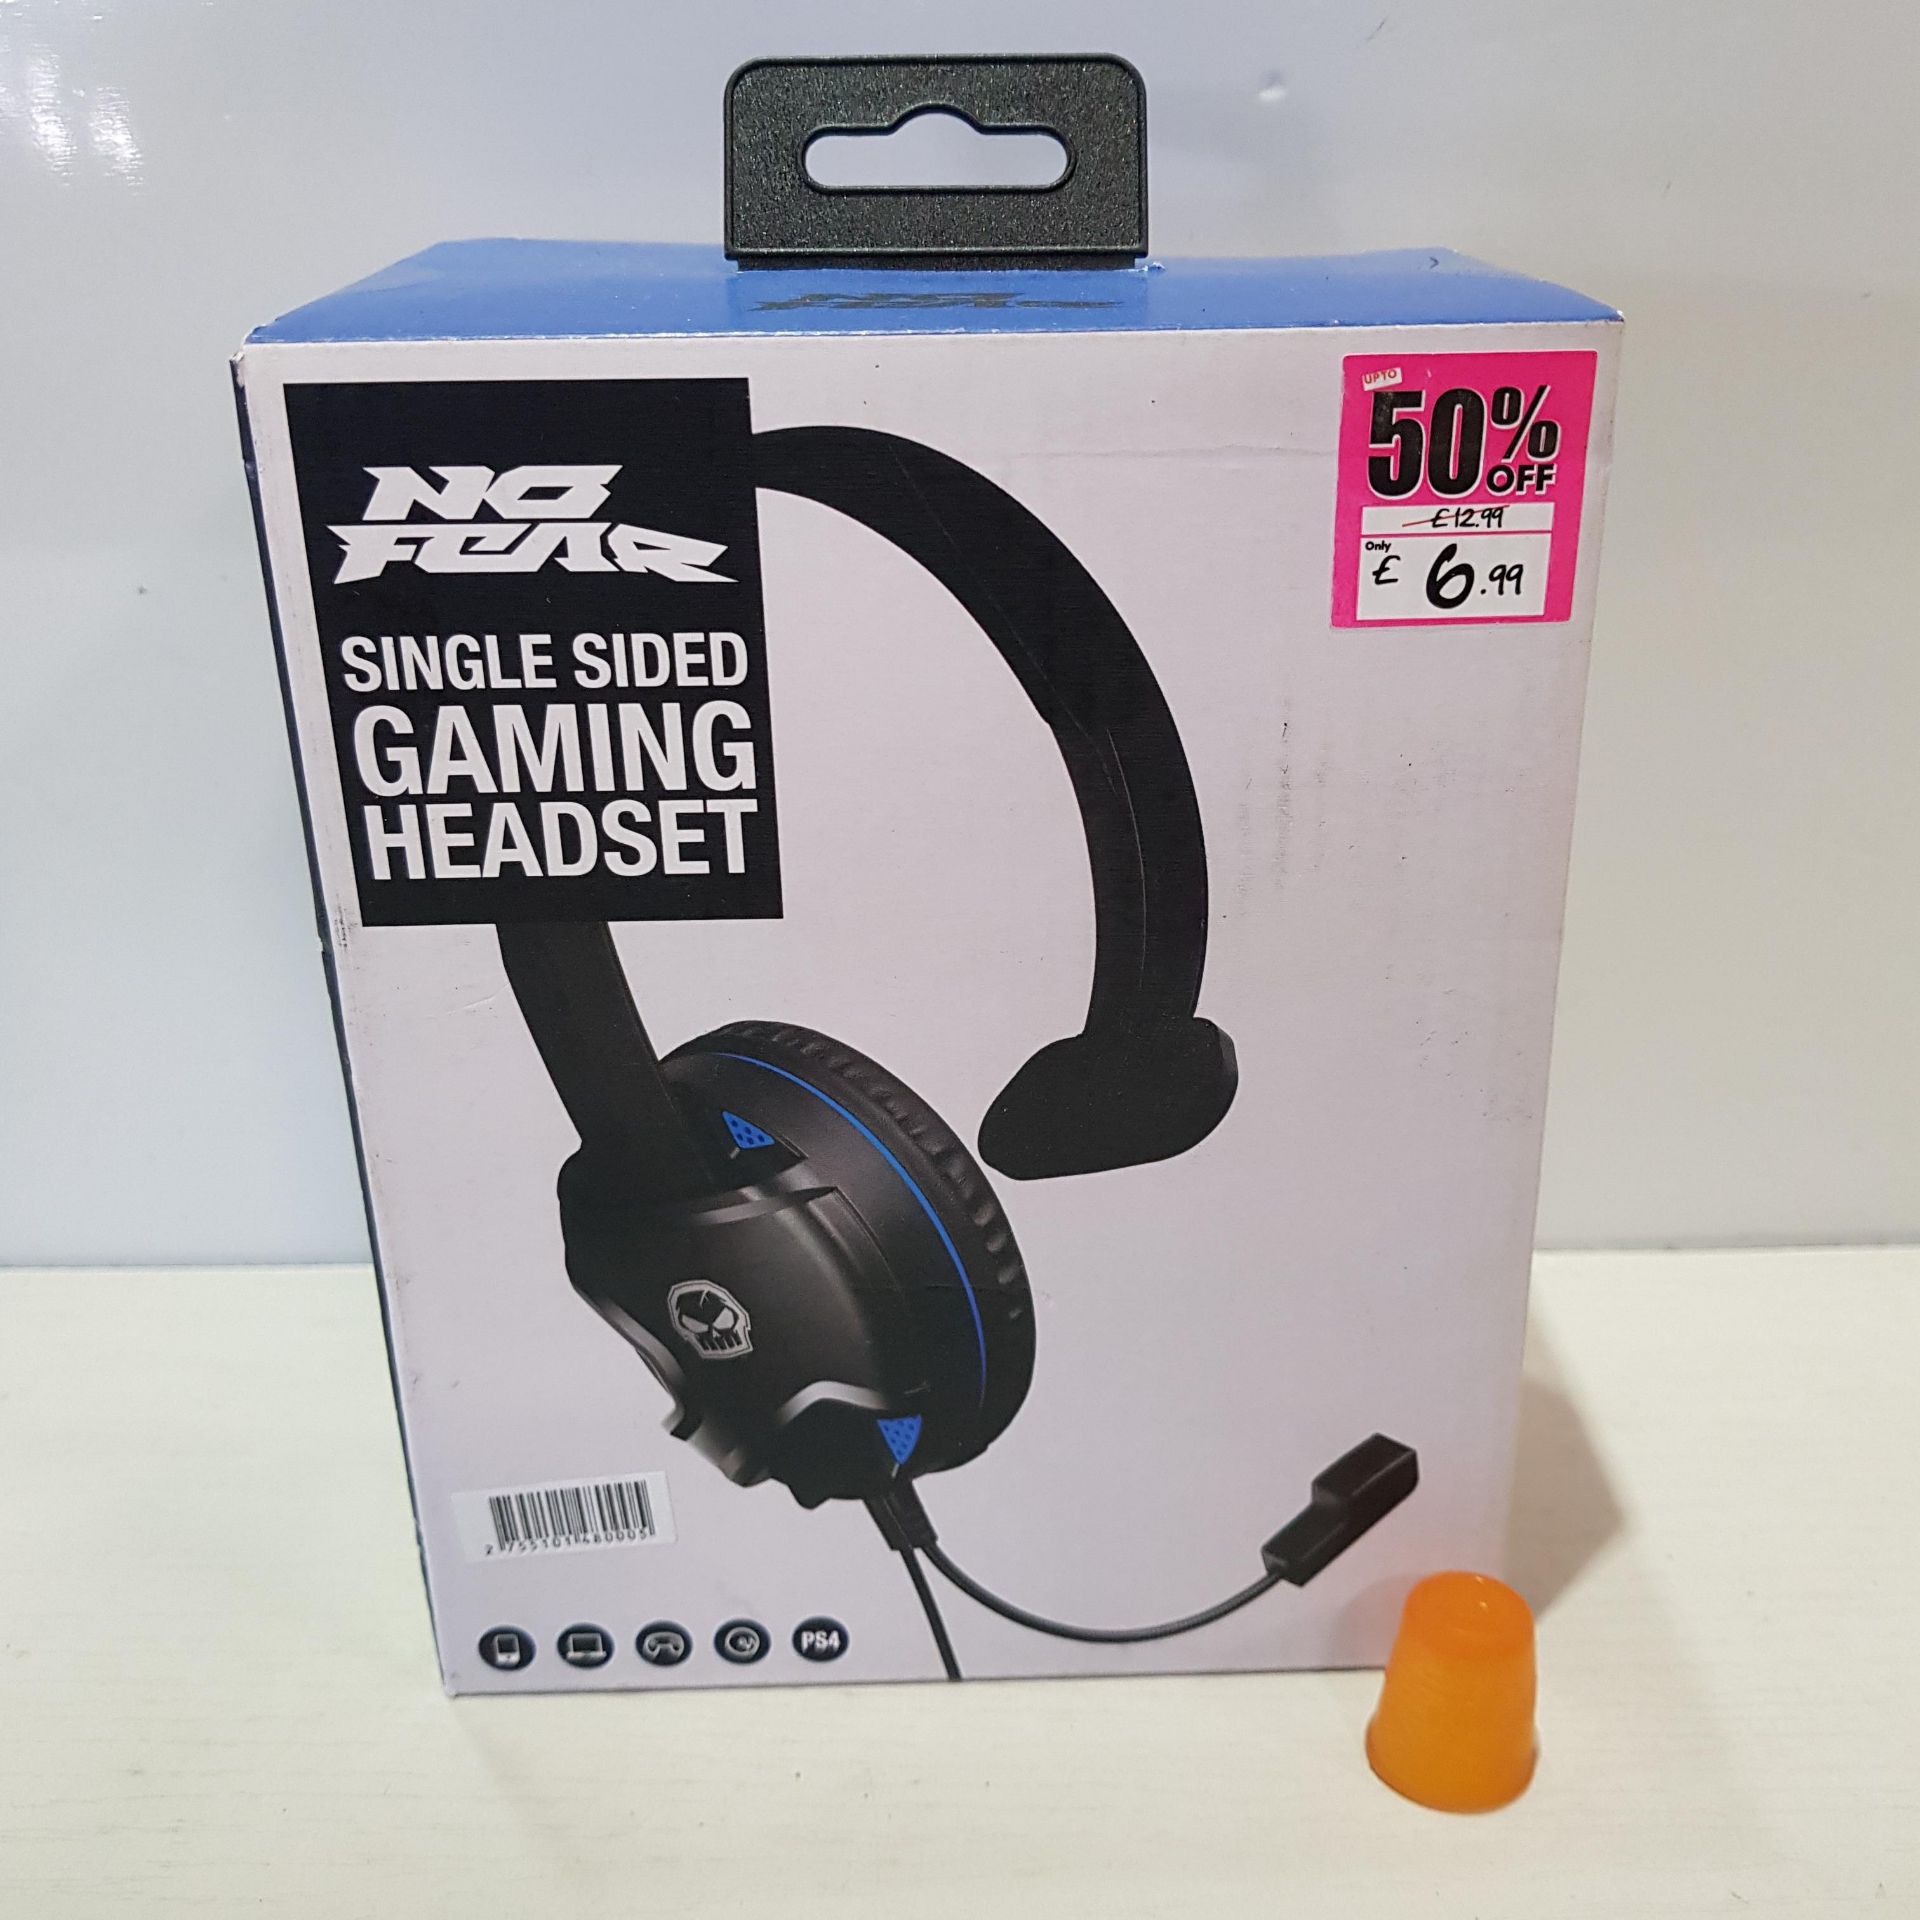 21 X NO FEAR SINGLE SIDED GAMING HEADSET